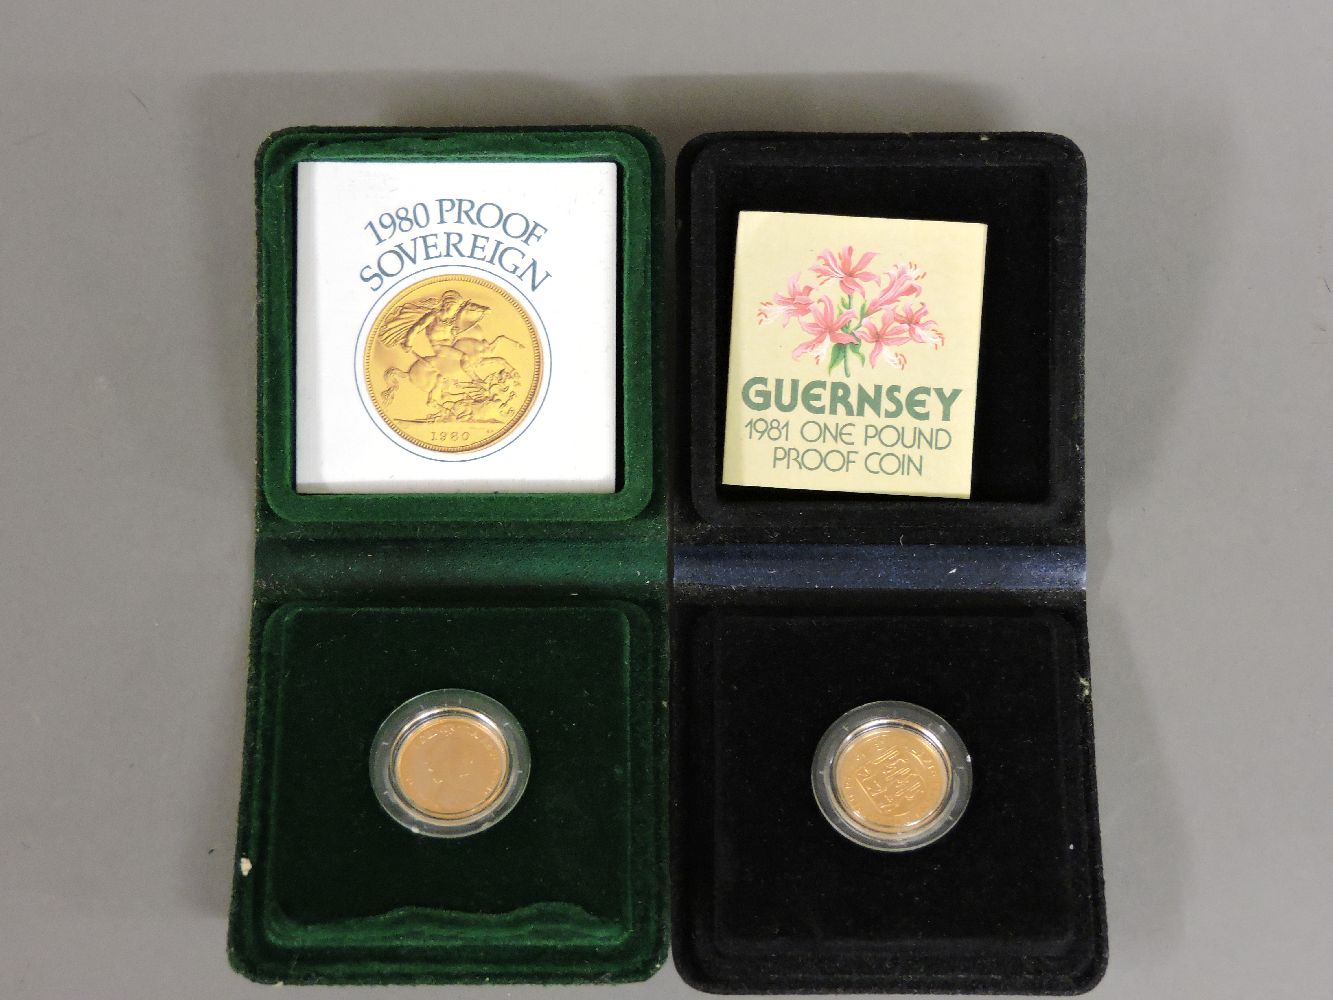 A 1980 proof gold sovereign, together with a 1981 Guernsey gold one pound coin